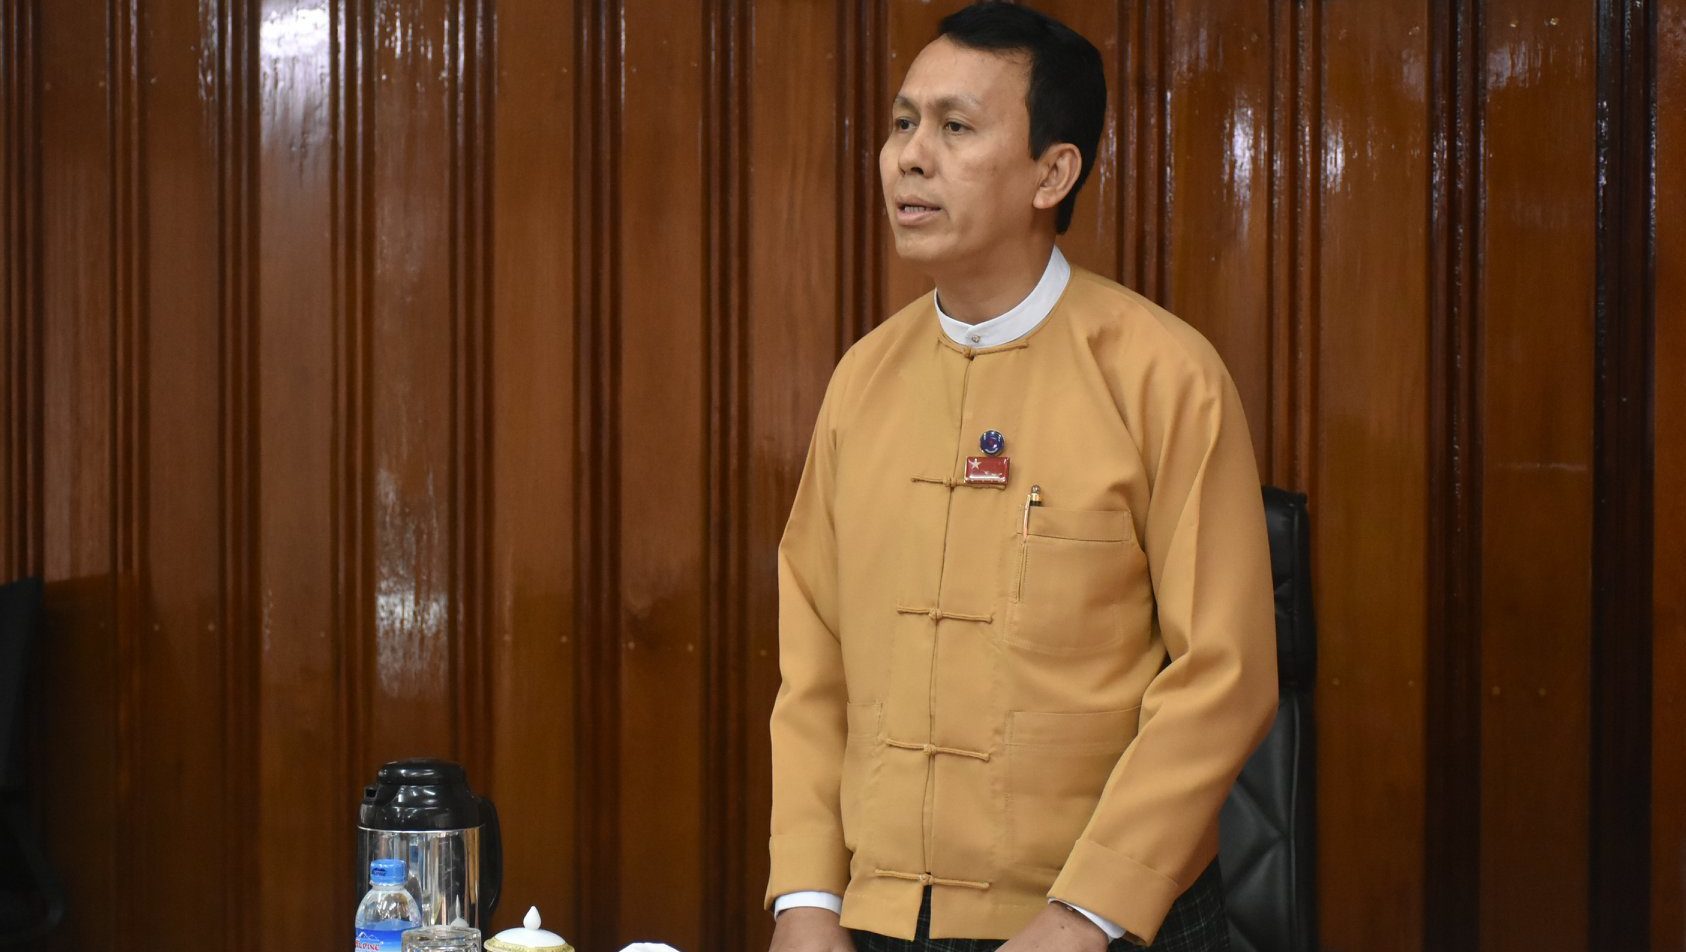 Yangon Region chief minister Phyo Min Thein at a cabinet meeting on Oct. 8, 2018. Photo: Facebook / Phyo Min Thein